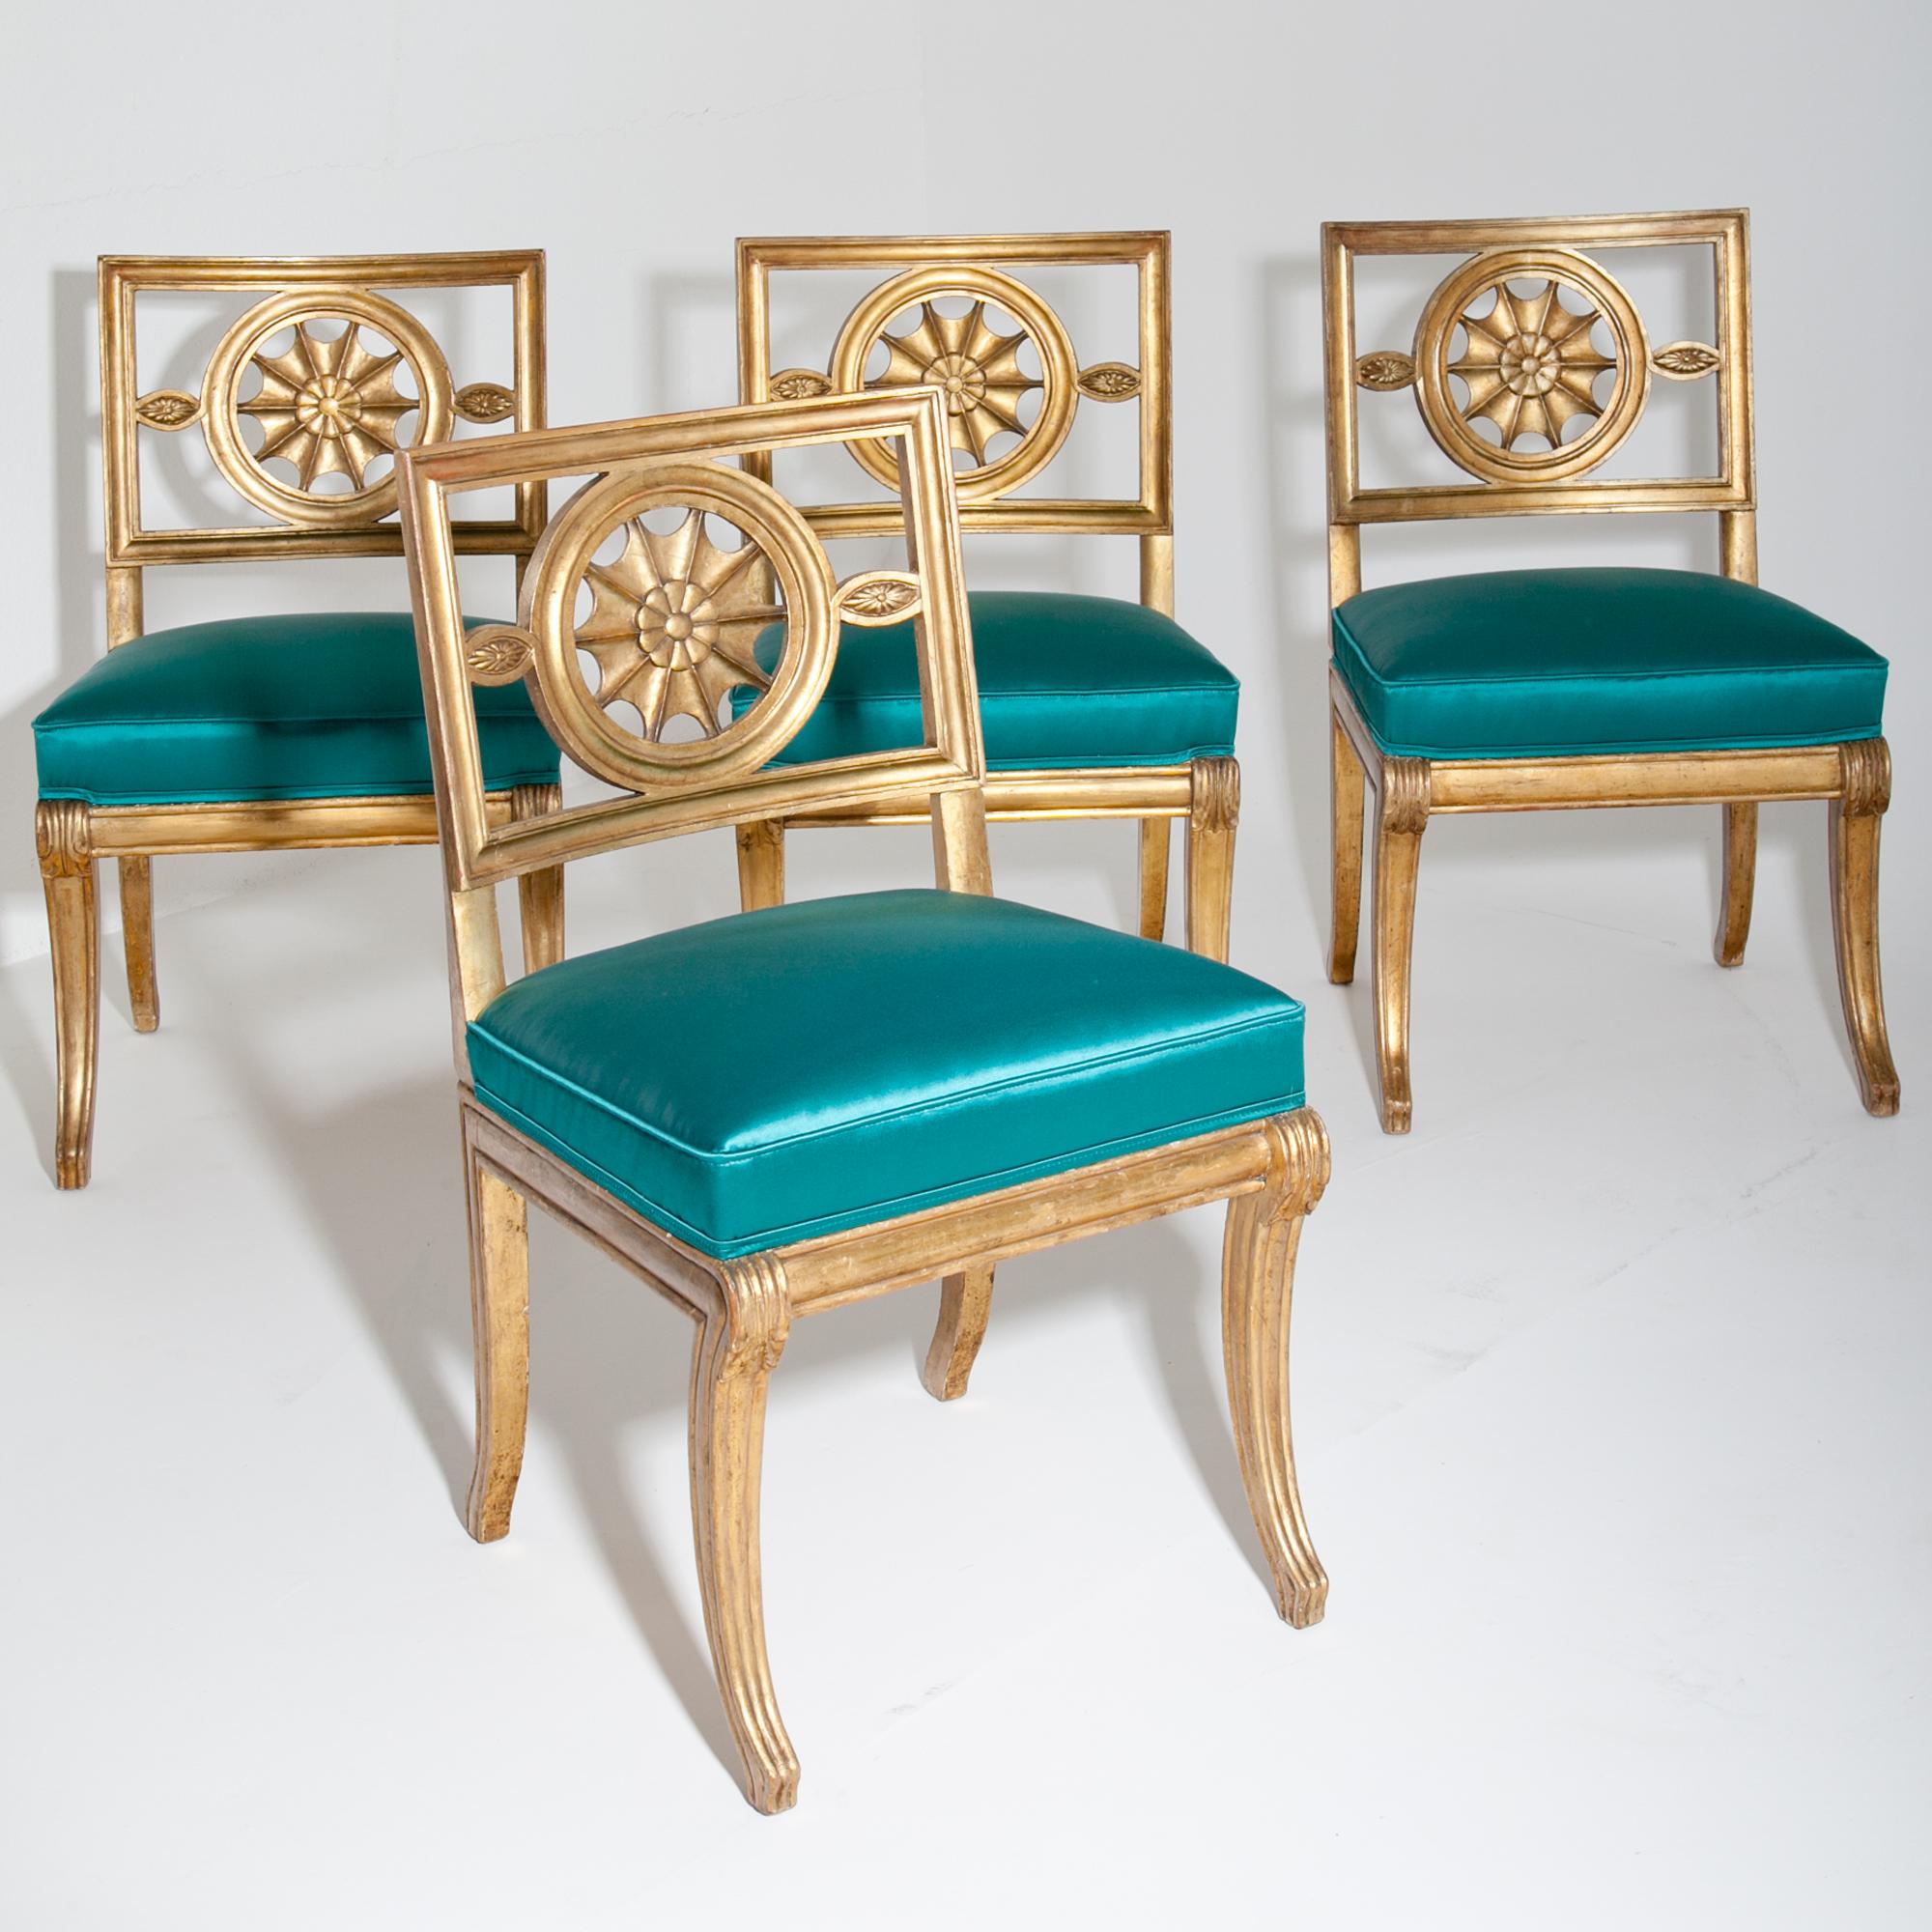 Four gilt chairs and one armchair with curved legs and backrests with a star shaped décor element. The chairs were reupholstered with a high-quality turquoise-blue fabric. The original chair was designed for Castle Wörlitz. 
Lit.: H. Schmitz: